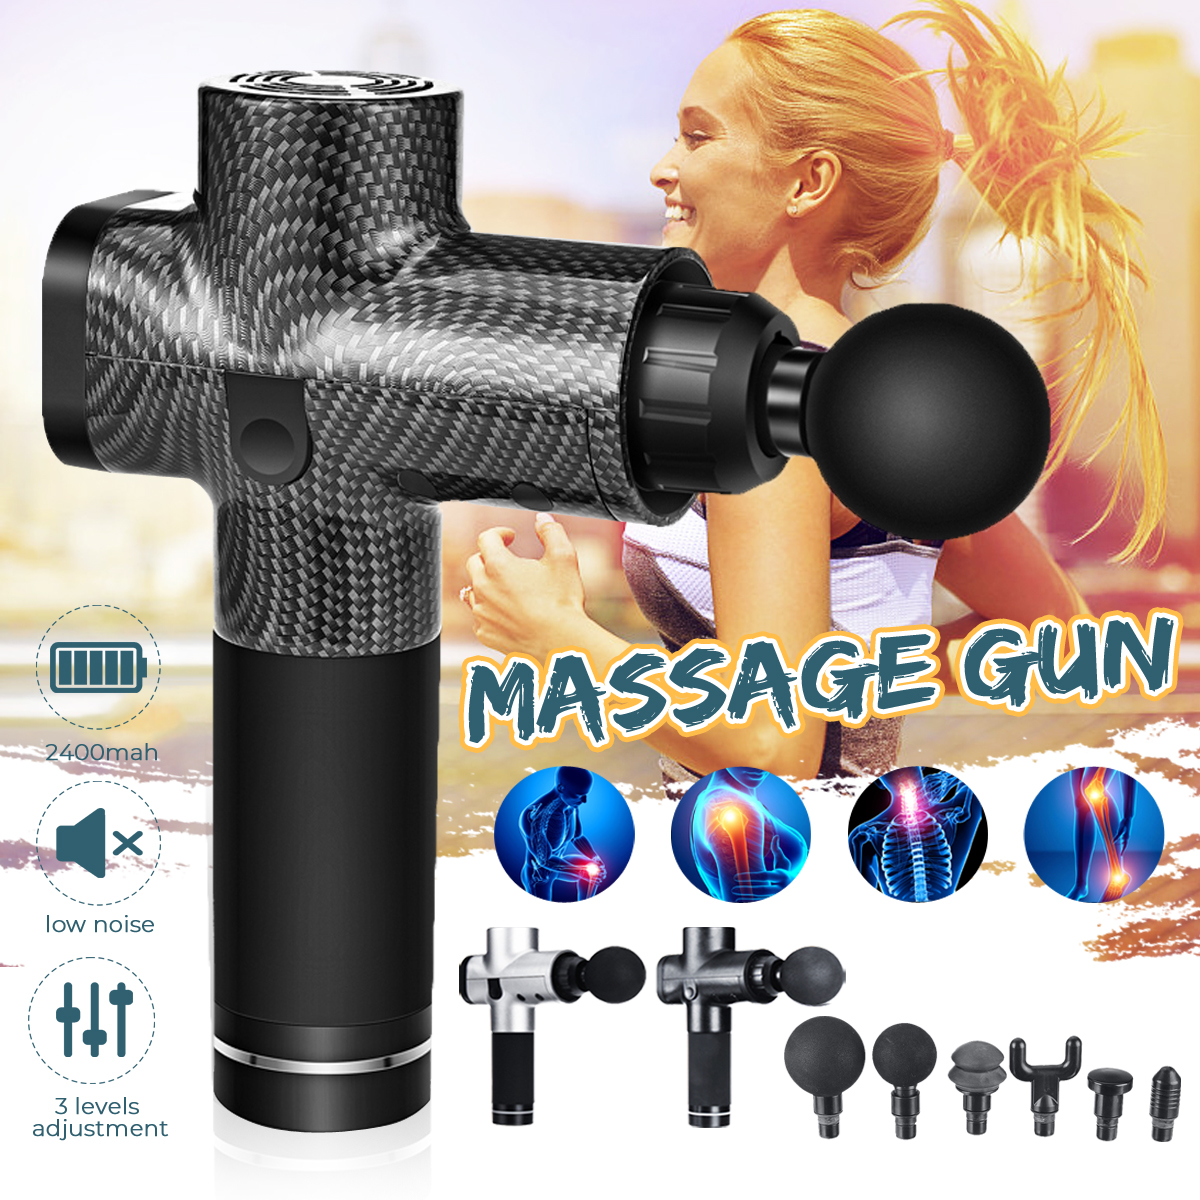 2400mAh-Electric-Percussion-Massager-3-Speeds-Low-Noise-Vibration-Muscle-Therapy-Device-with-6-Massa-1550390-2